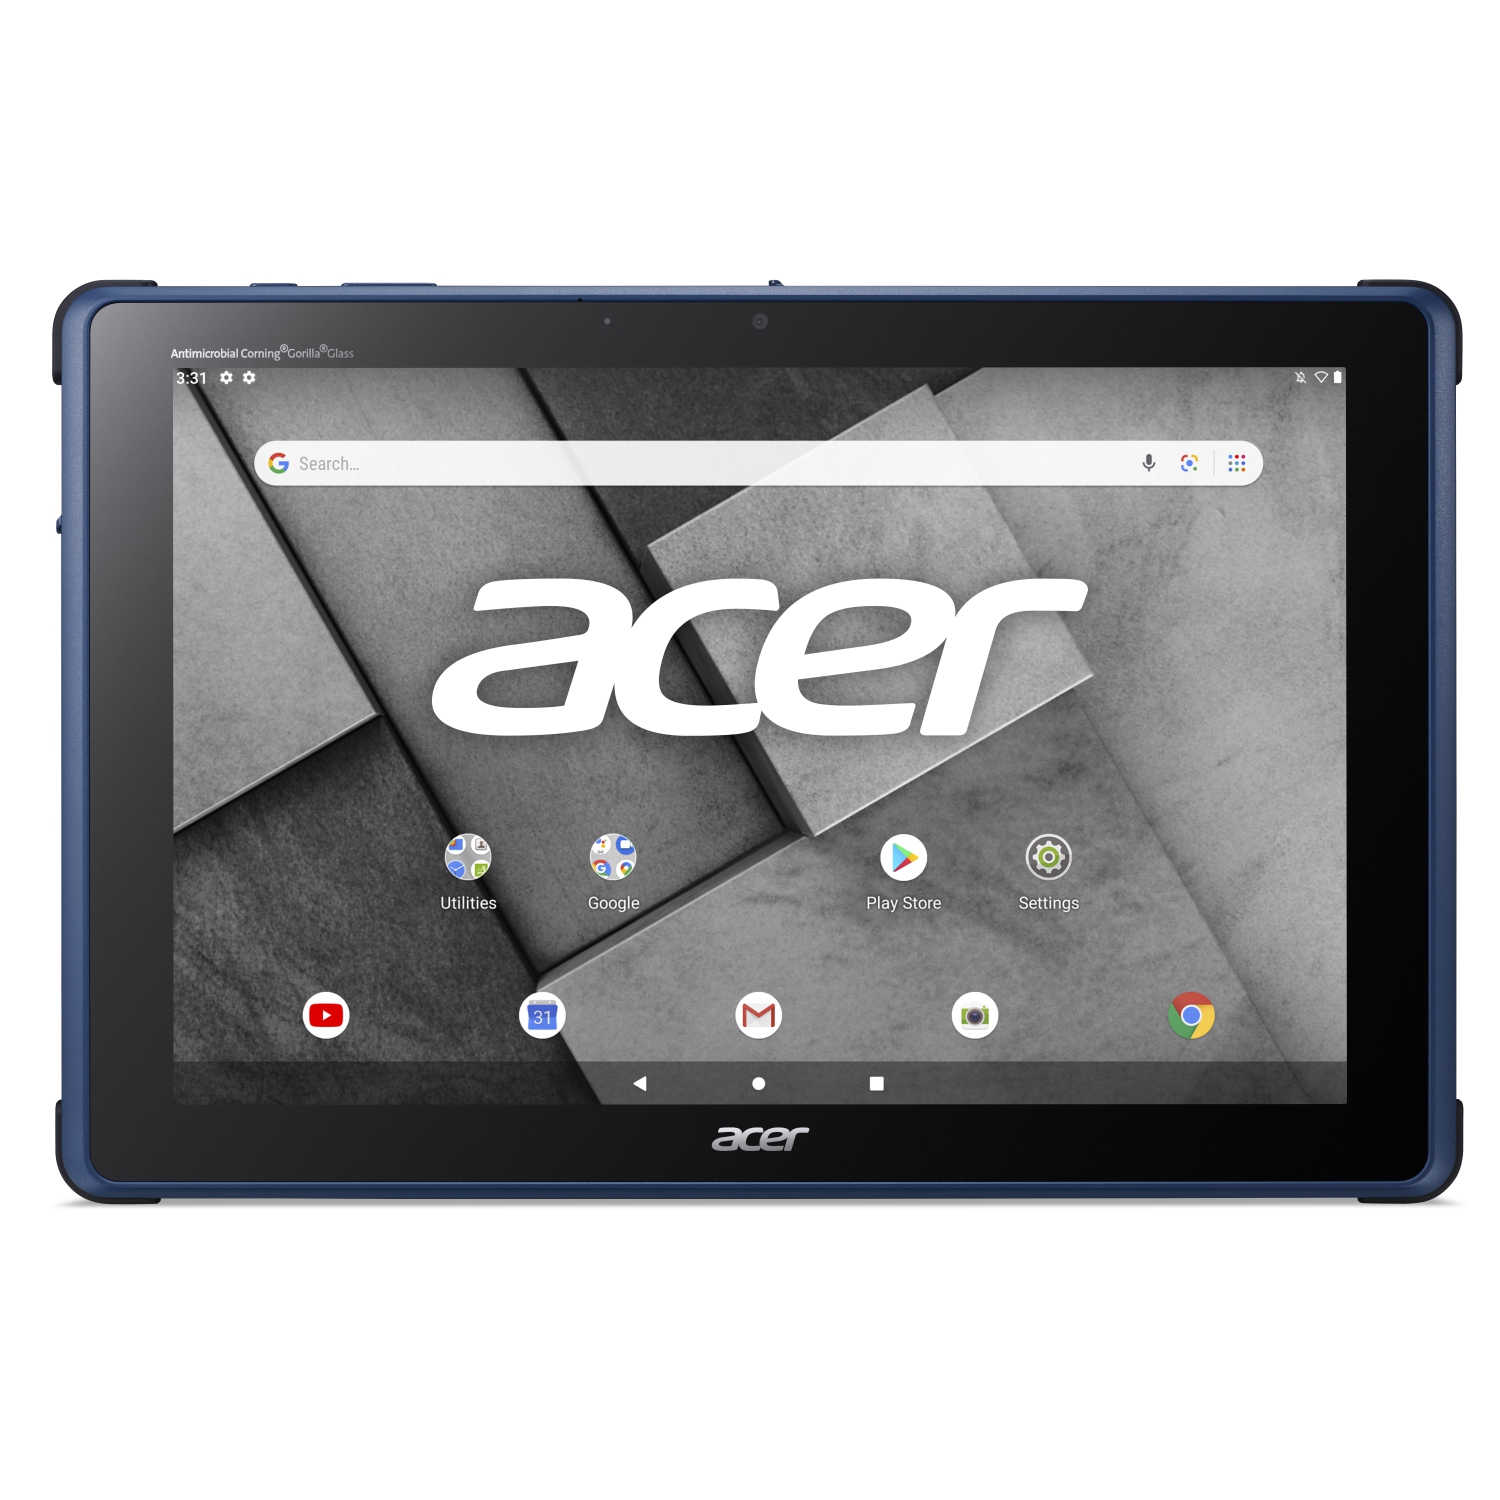 Acer Enduro Ruggedized Android Tablet, 10.1" FHD IPS Screen, MT8167A CPU, 2GB RAM /32 eMMC, Android GO, Anti-Microbial coating, Blue, EUT110A-11A-K9VQ